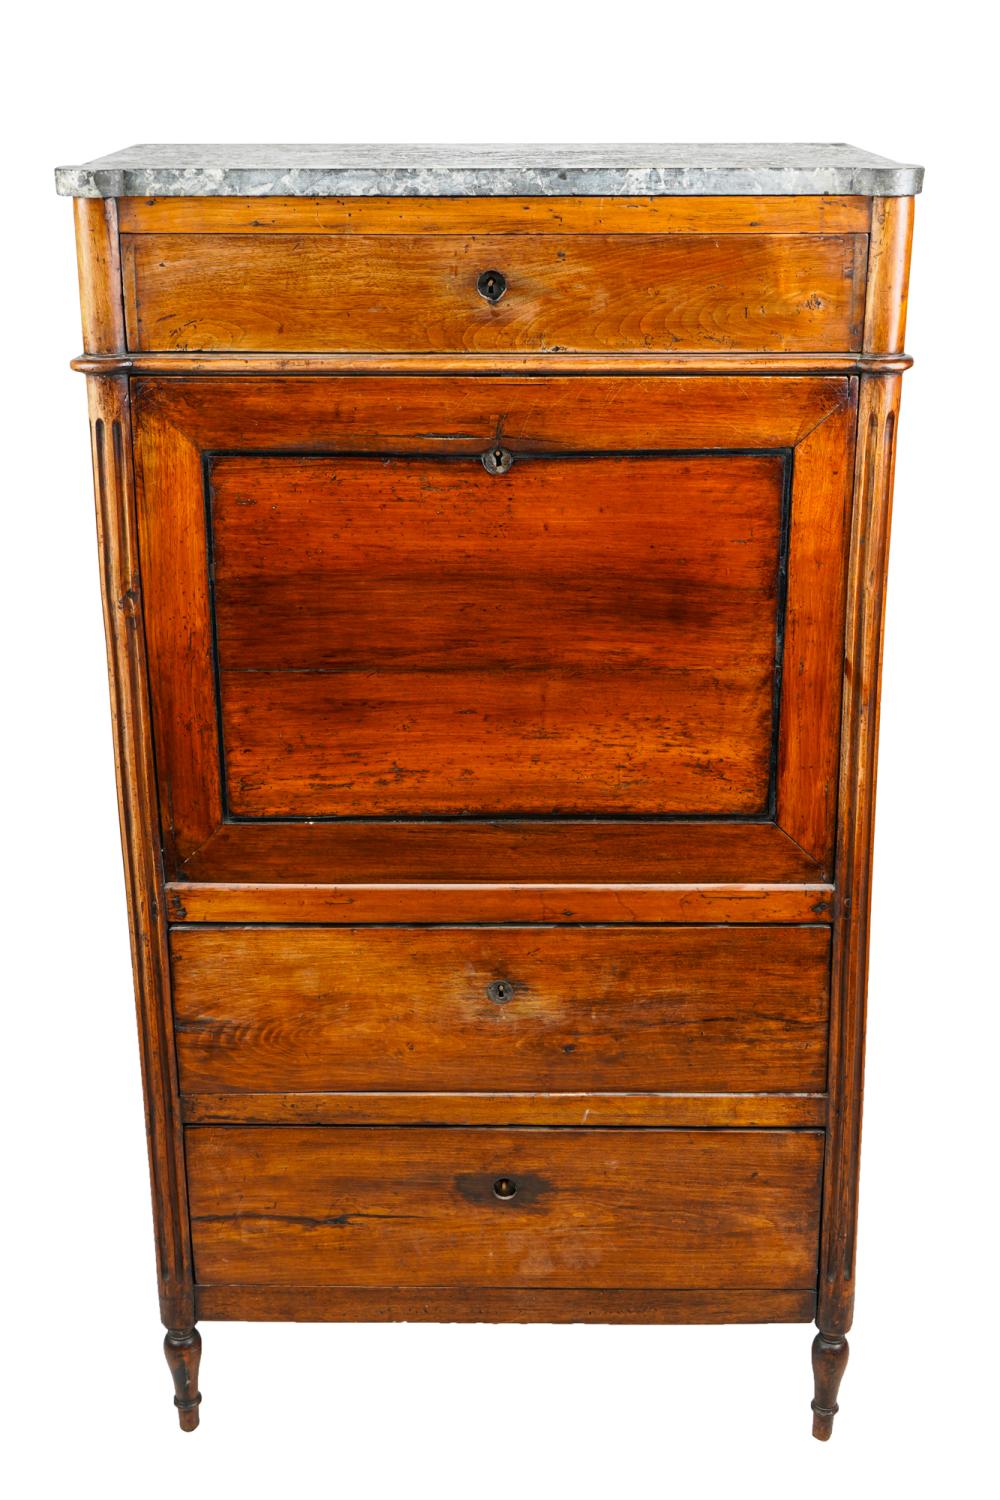 FRENCH FRUITWOOD & MARBLE-TOP SECRETAIRE